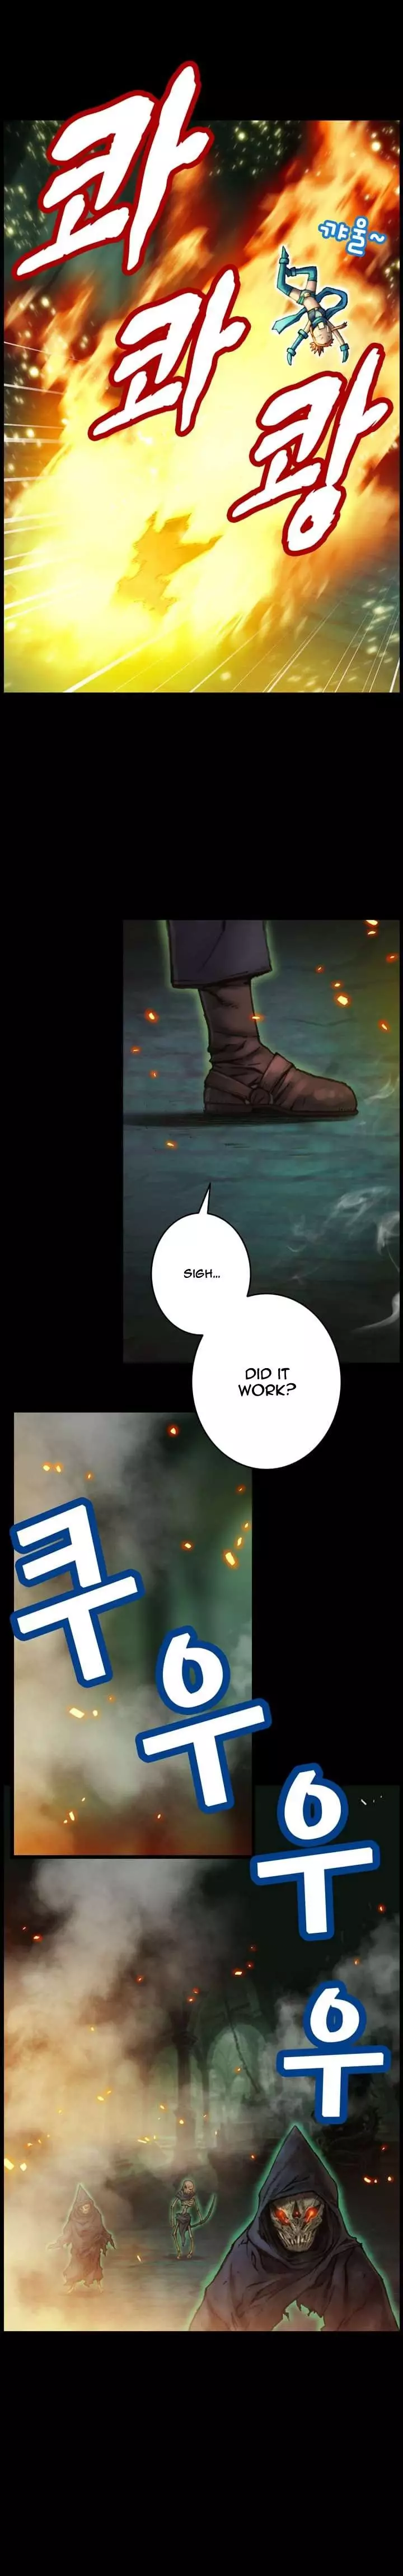 The Legendary Moonlight Sculptor - 43 page 007